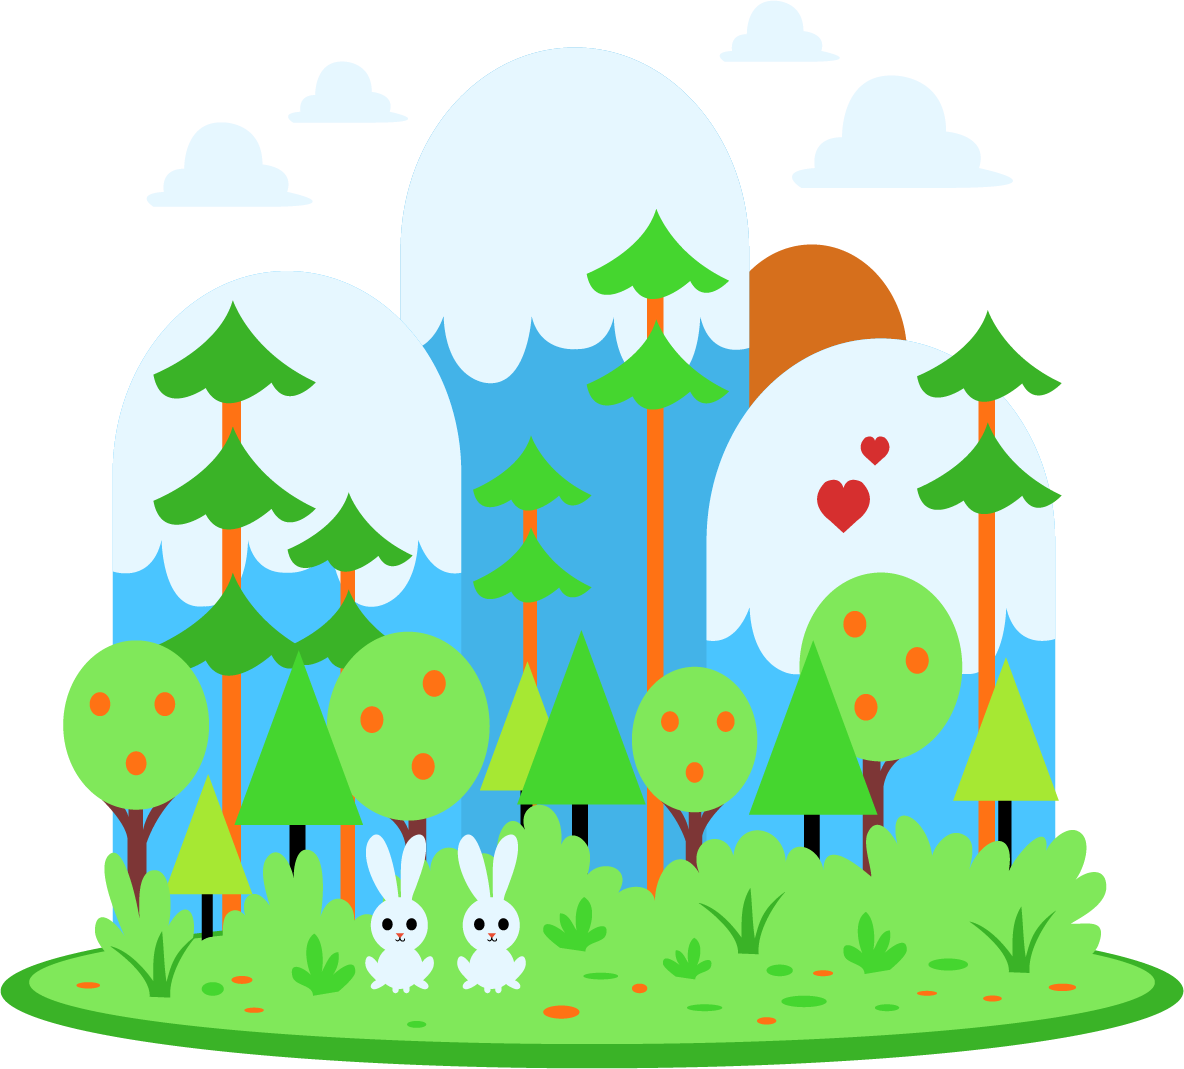 Cute Bunny Forest Scenery 1184*1069 Transprent Png - Cute Bunny Forest Scenery 1184*1069 Transprent Png (1184x1069)